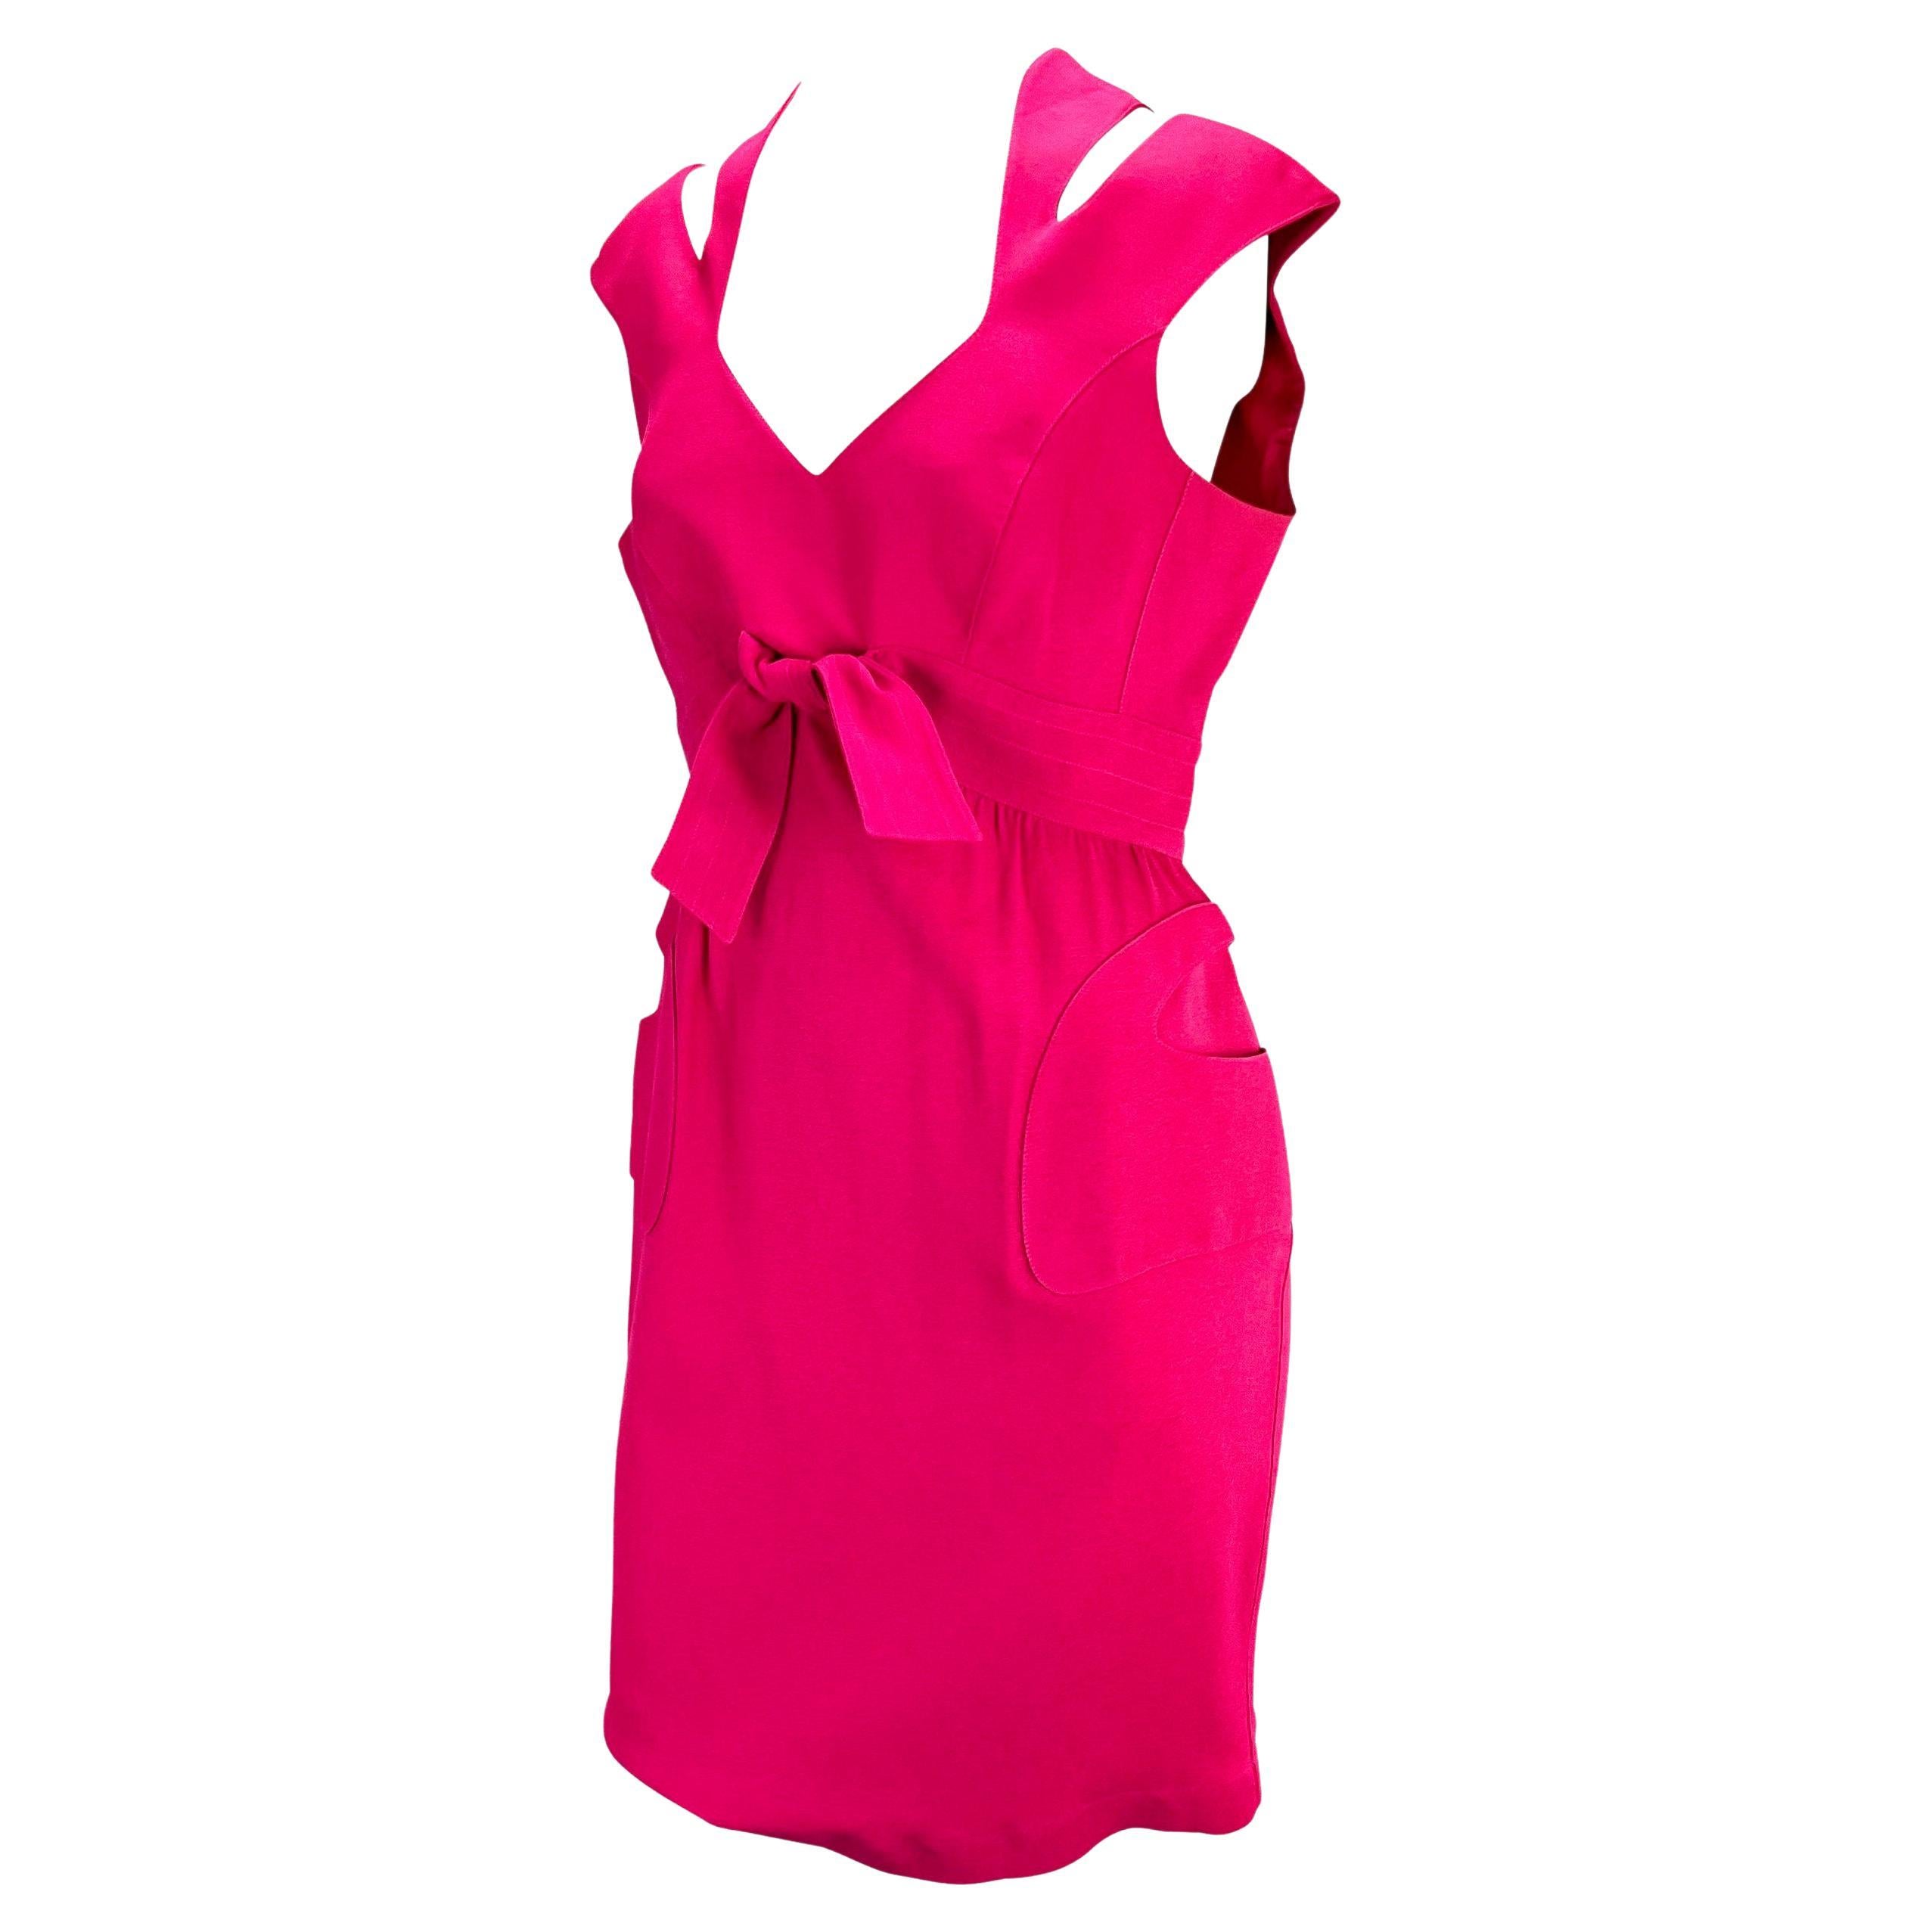 Presenting a hot, hot pink Thierry Mugler dress, designed by Manfred Mugler. From the 1980s, this dress features masterful design and tailoring. Accented with cut outs at the shoulders, a tie at the waist, and abstract pockets at the front of the